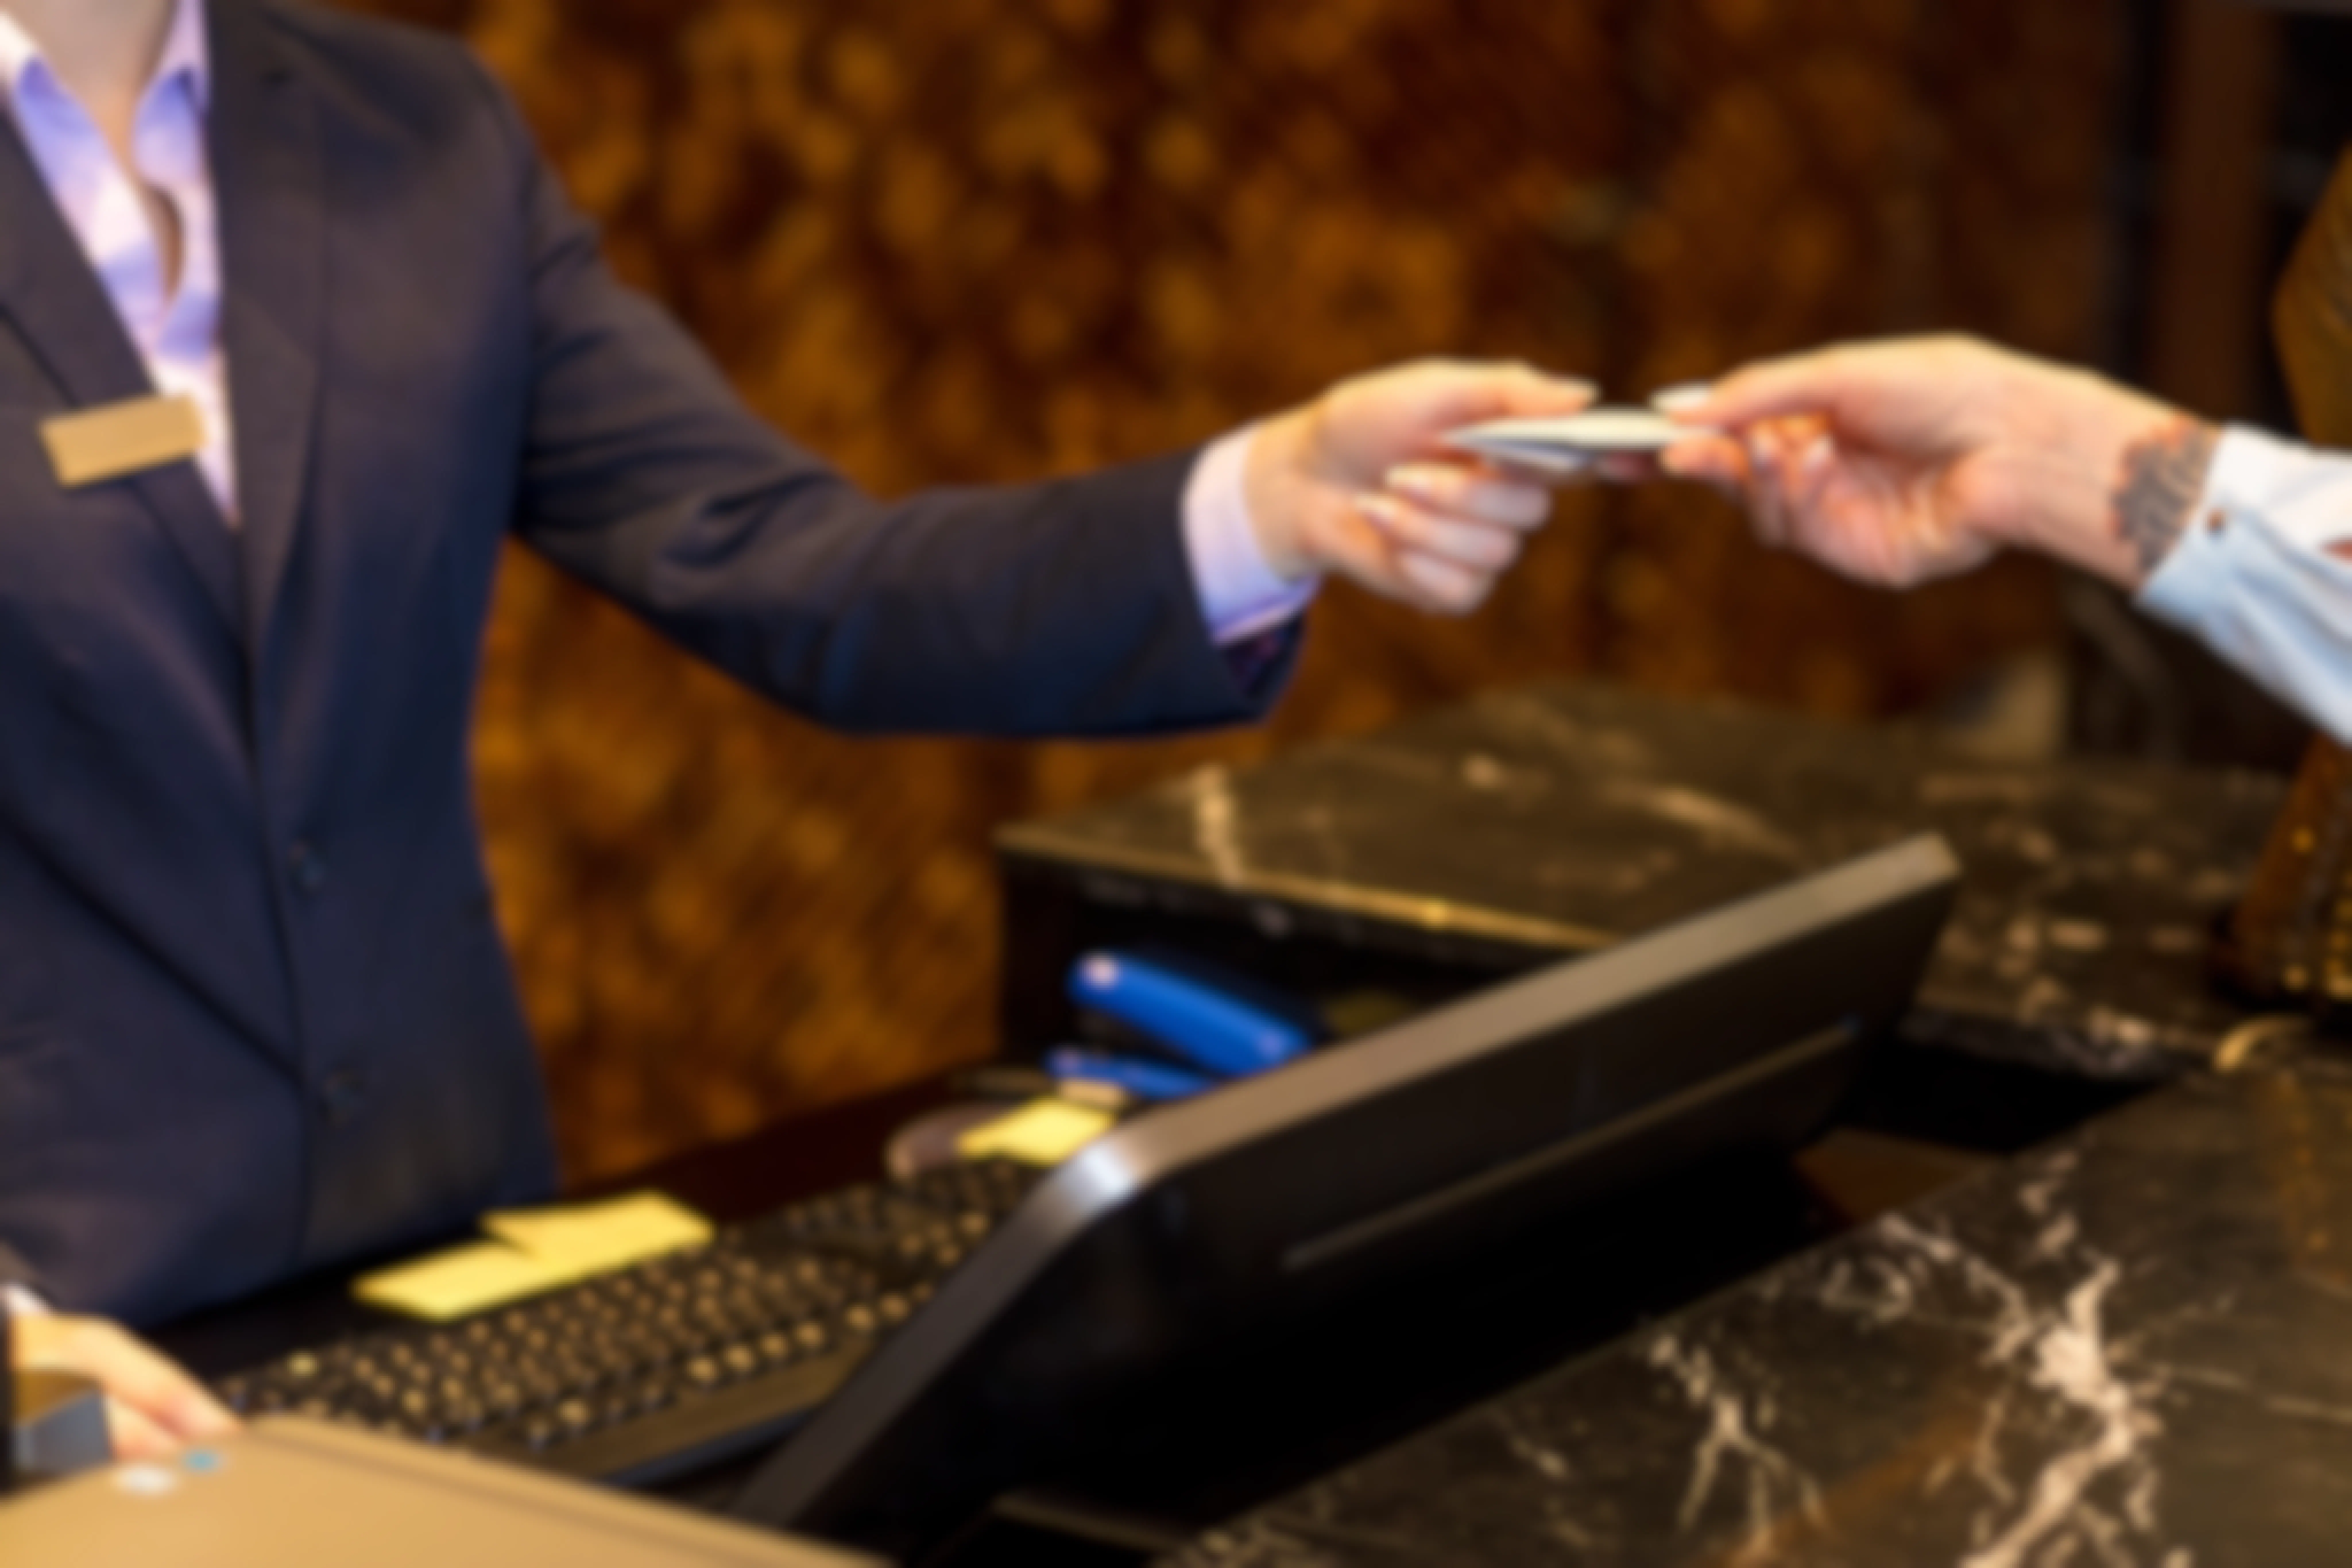 A person being handed a hotel room key at the check-in desk